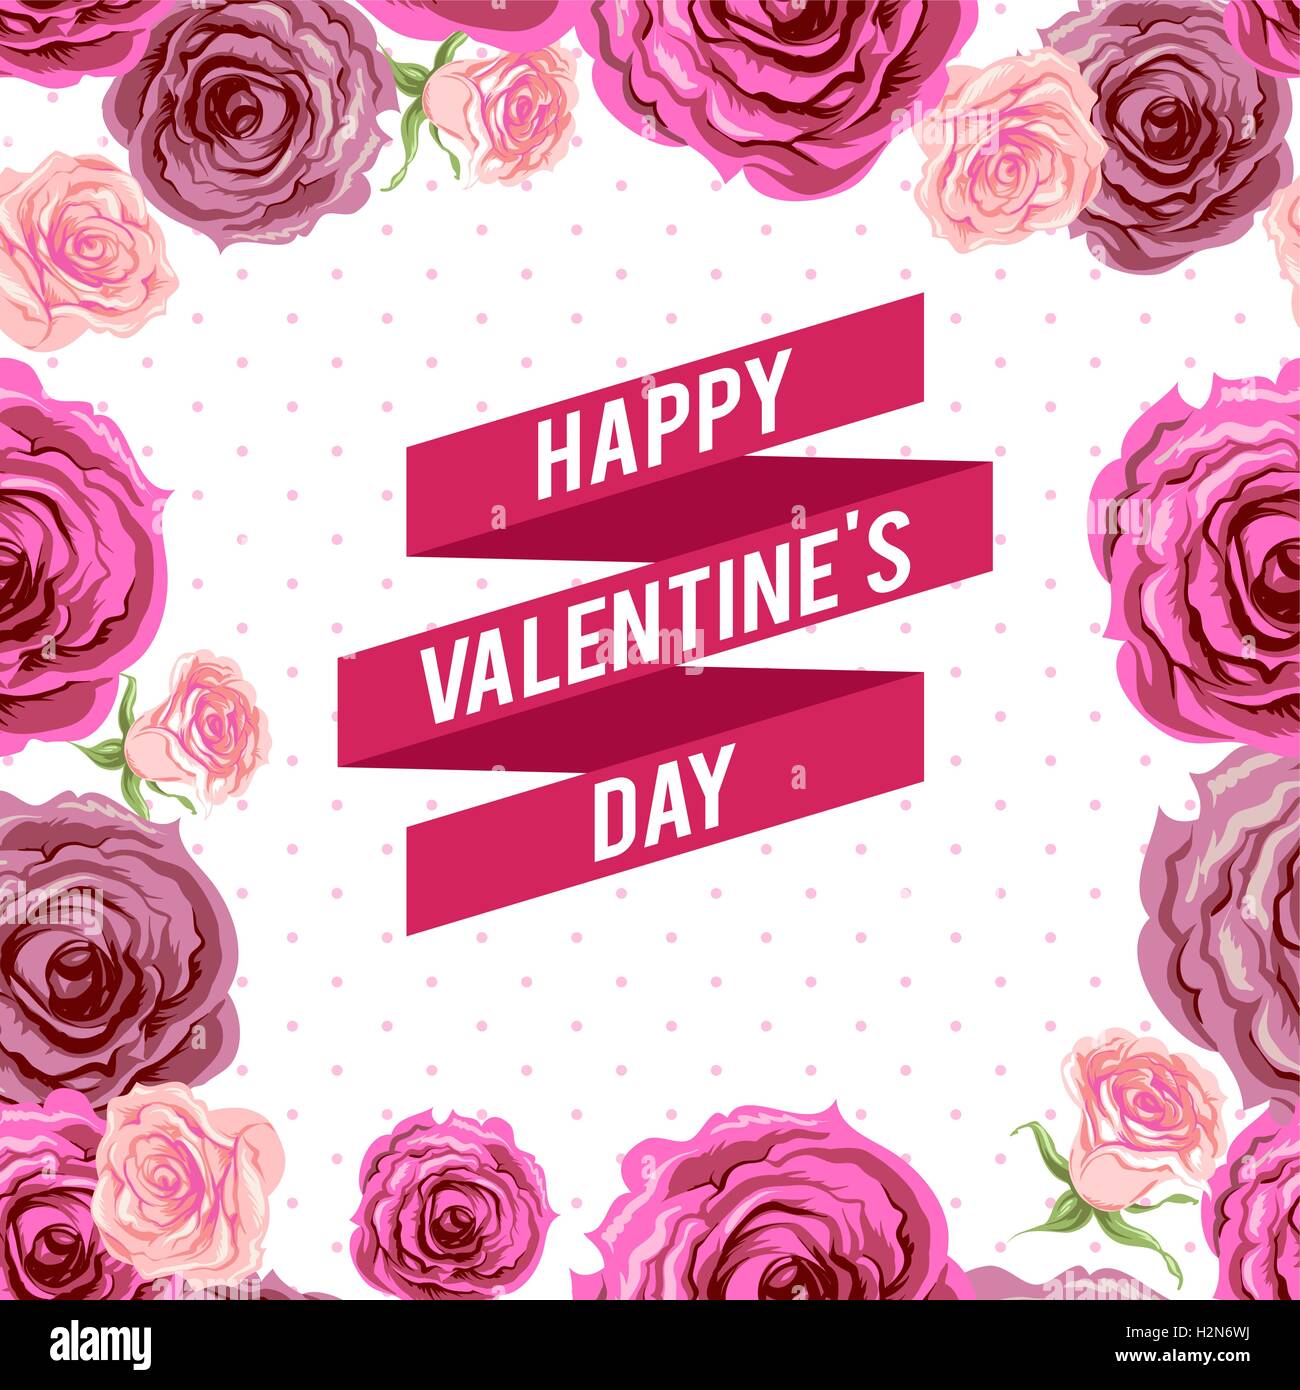 Valentne's day ribbon and roses Stock Vector